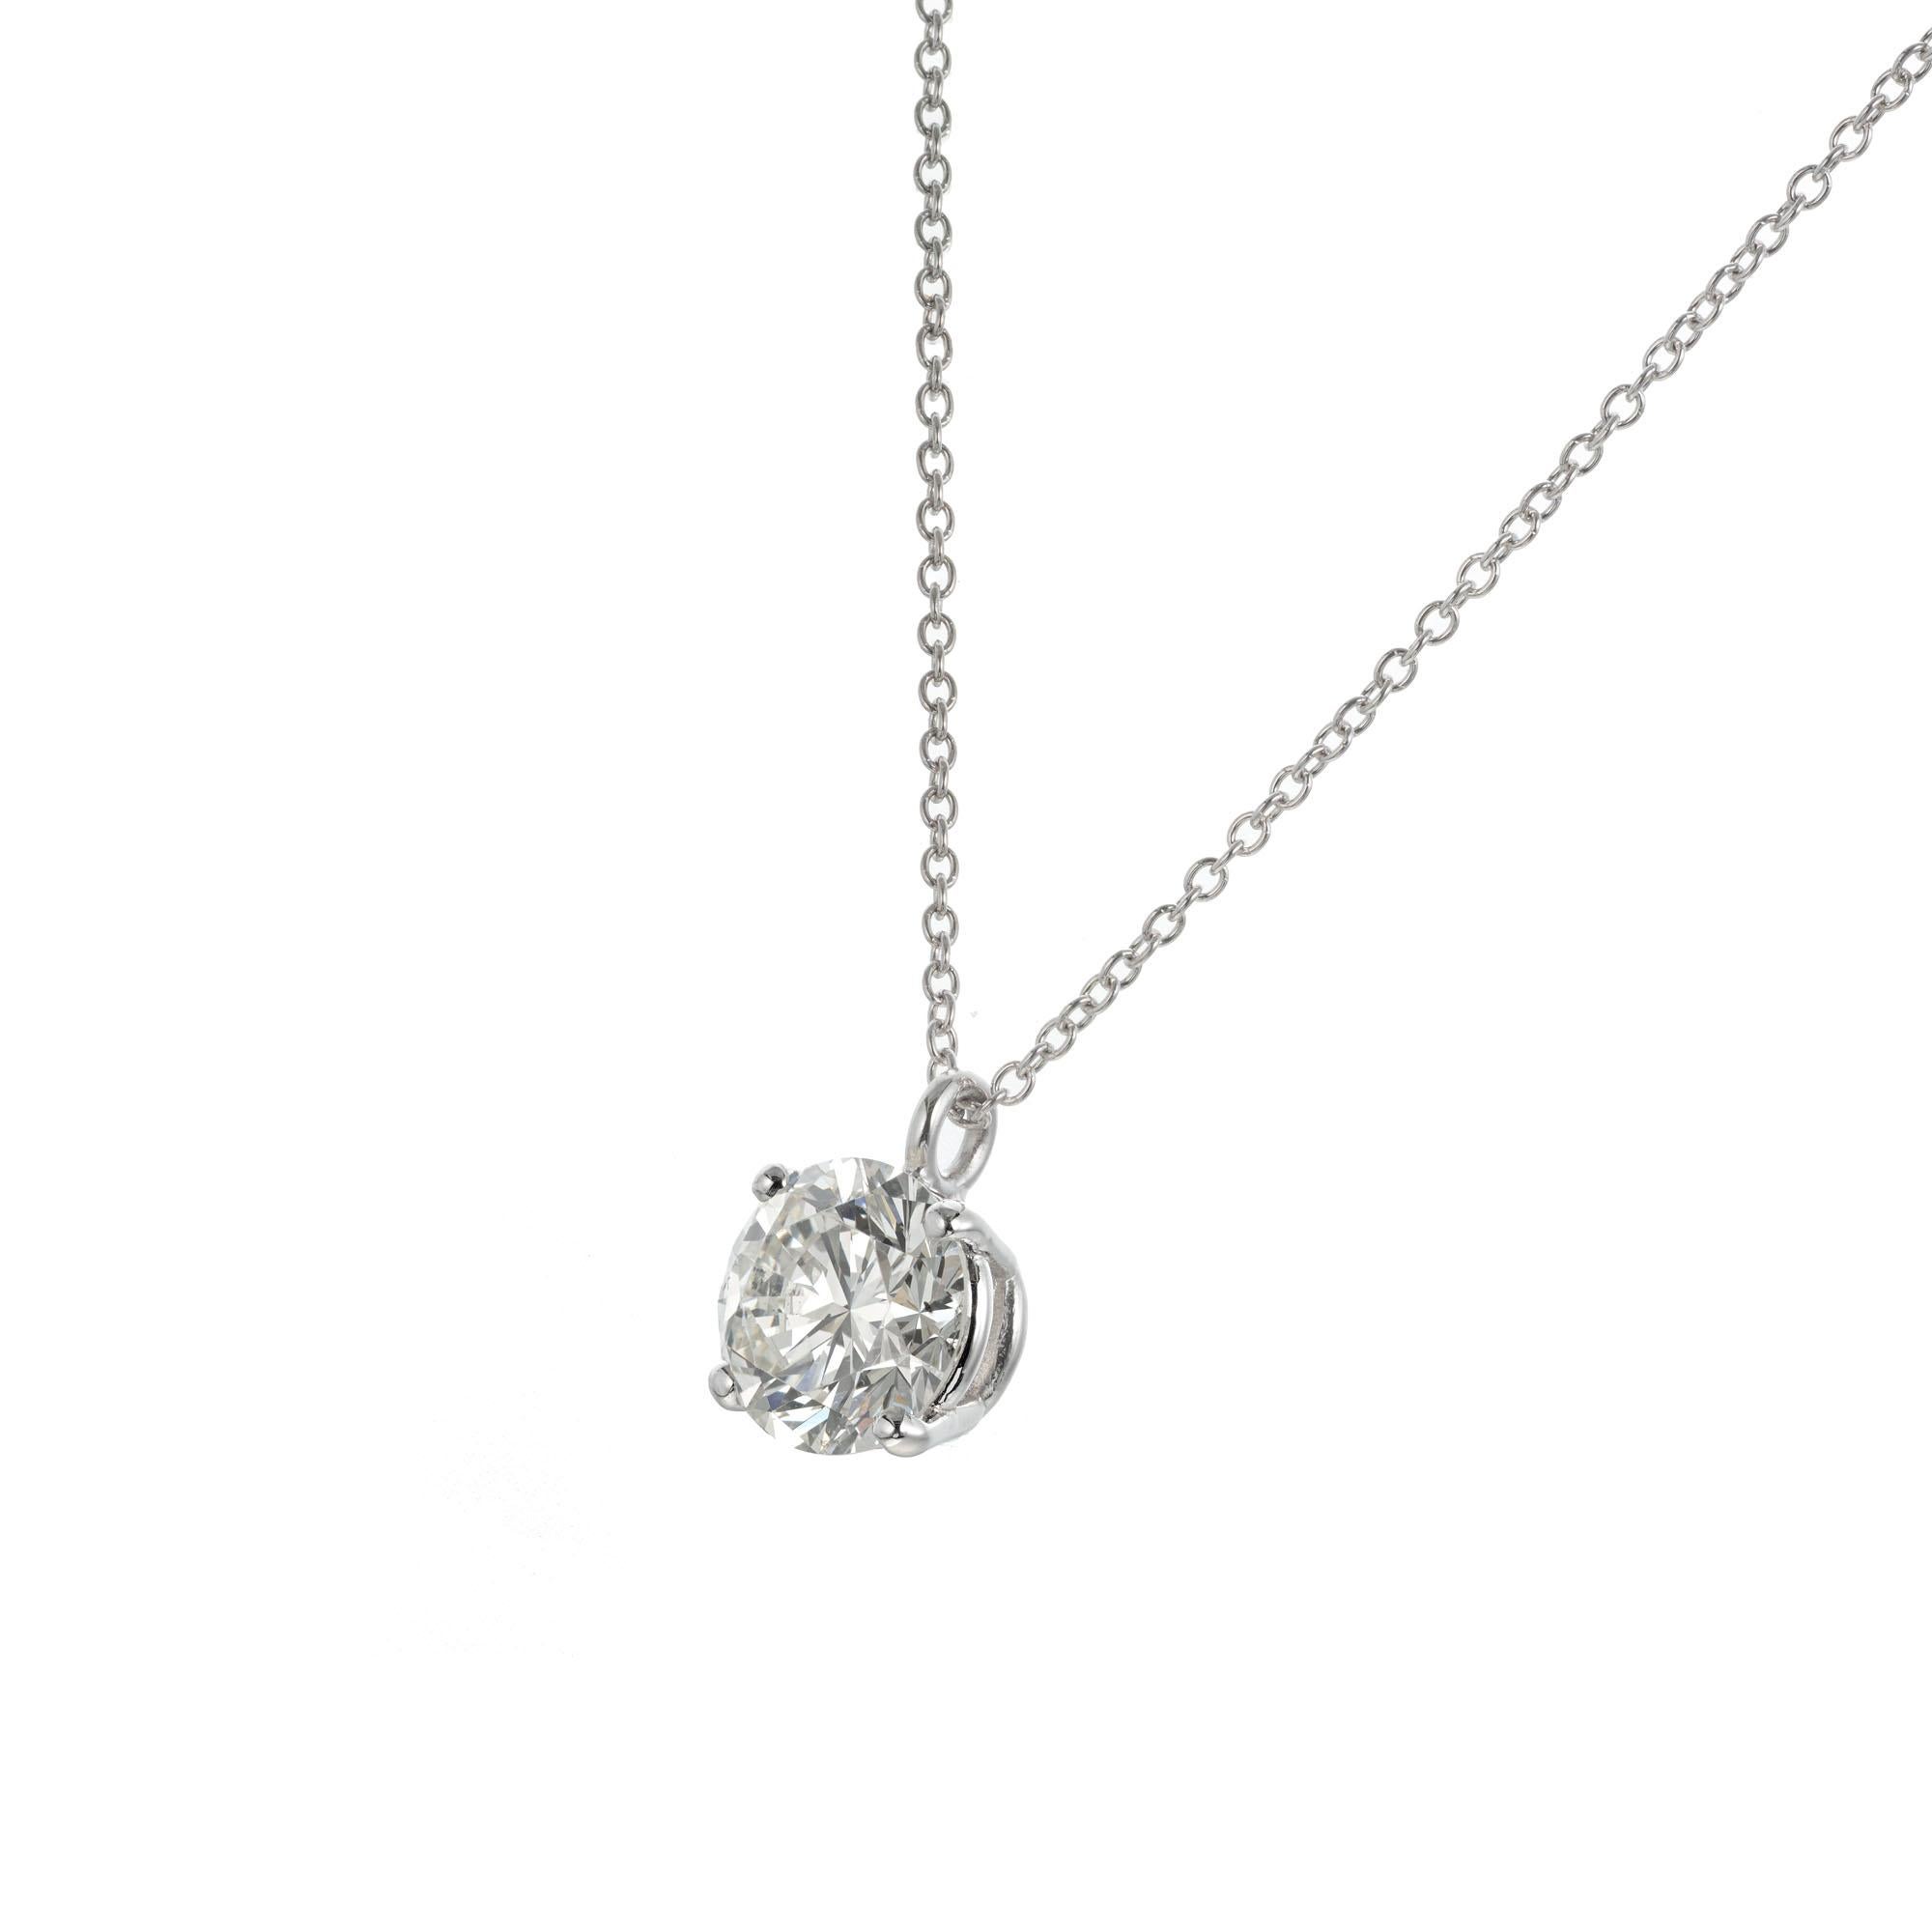 Peter Suchy 2.05 carat GIA certified round Ideal brilliant cut diamond pendant necklace in platinum. 16 inches long. 

1 round brilliant cut diamond L SI, approx. 2.05ct GIA Certificate # 5201140880
Platinum 
Stamped: PT950
3.7 grams
Top to bottom: